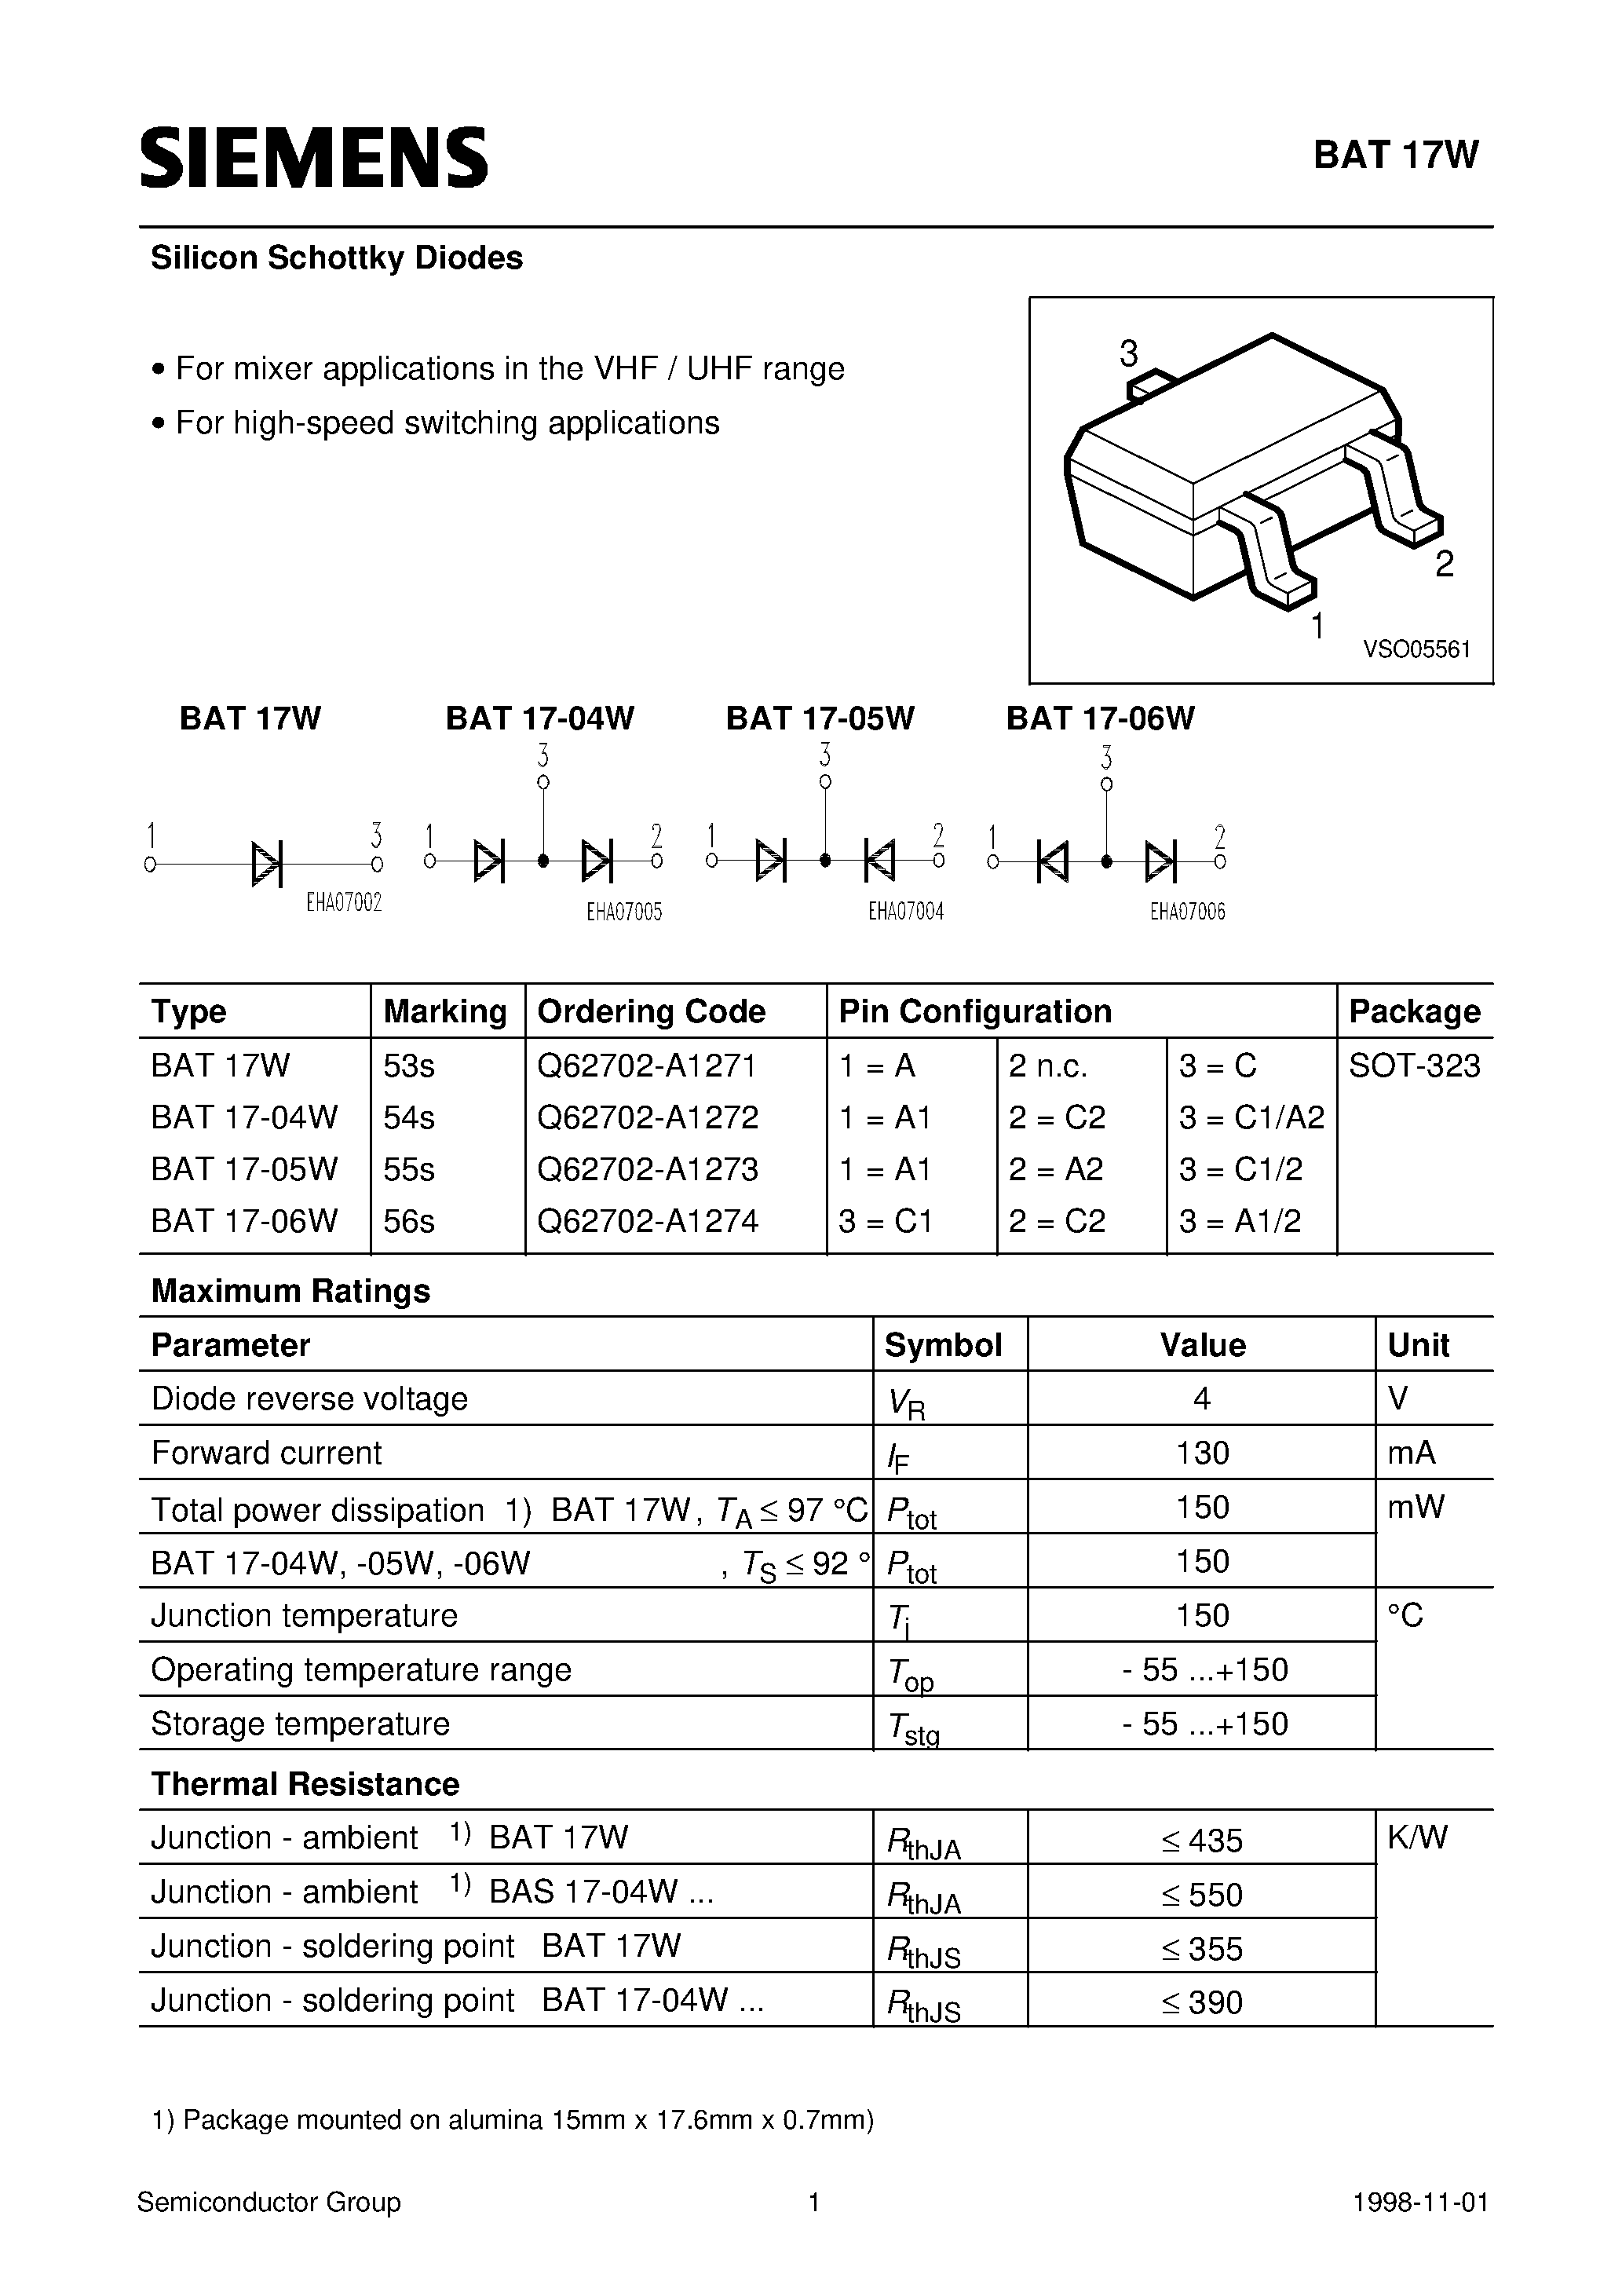 Datasheet BAT17-06W - Silicon Schottky Diodes (For mixer applications in the VHF / UHF range For high-speed switching applications) page 1